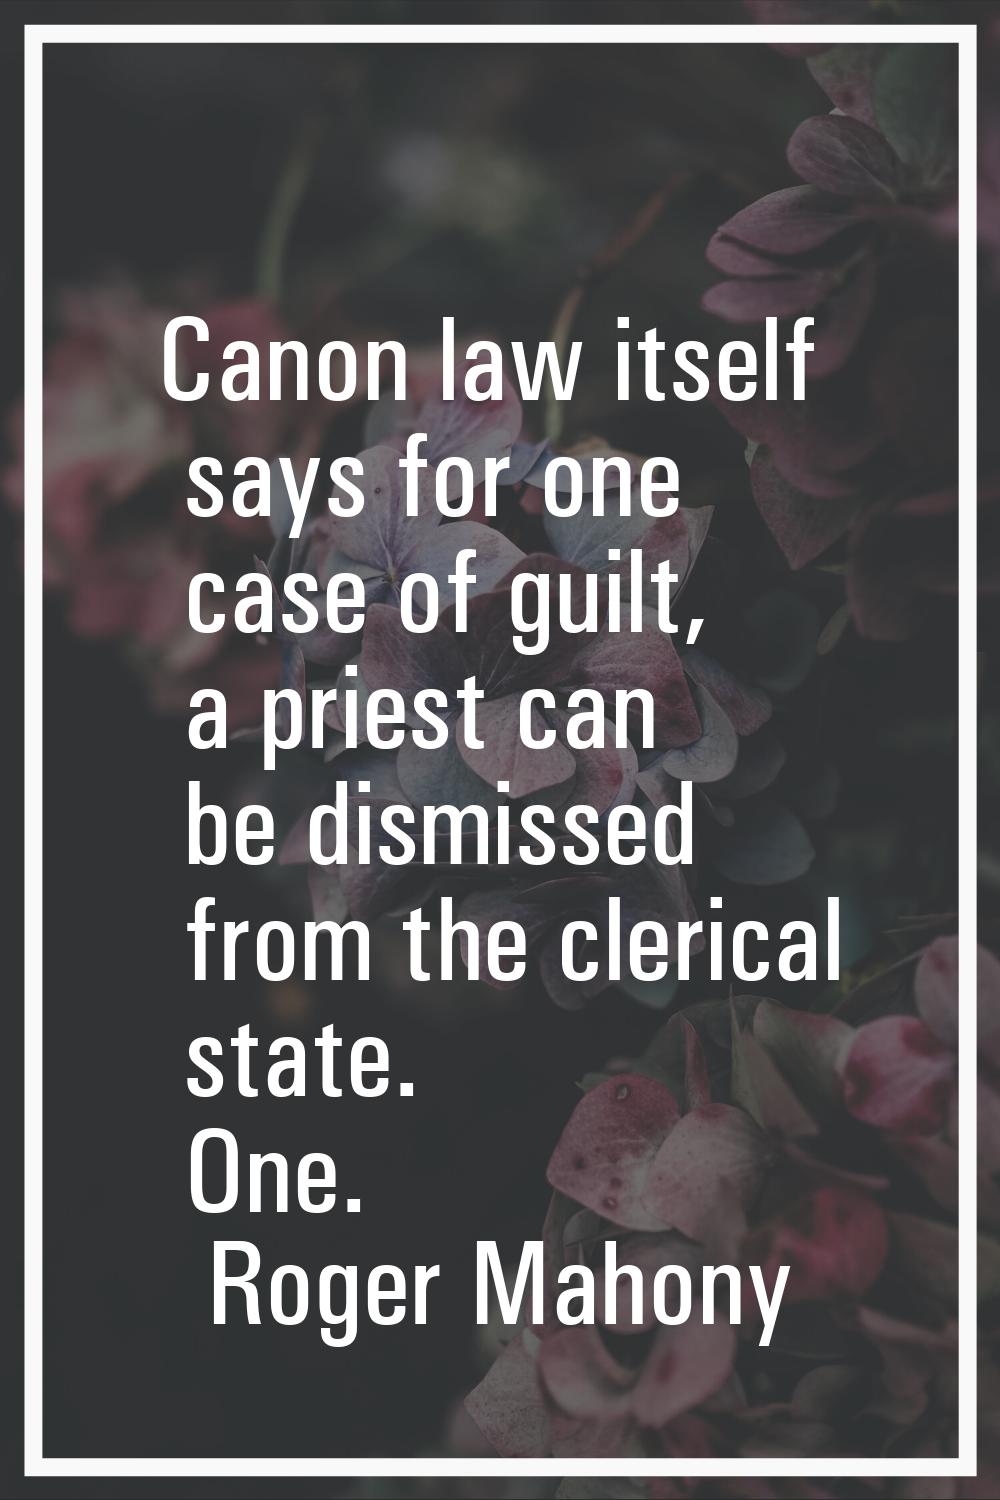 Canon law itself says for one case of guilt, a priest can be dismissed from the clerical state. One